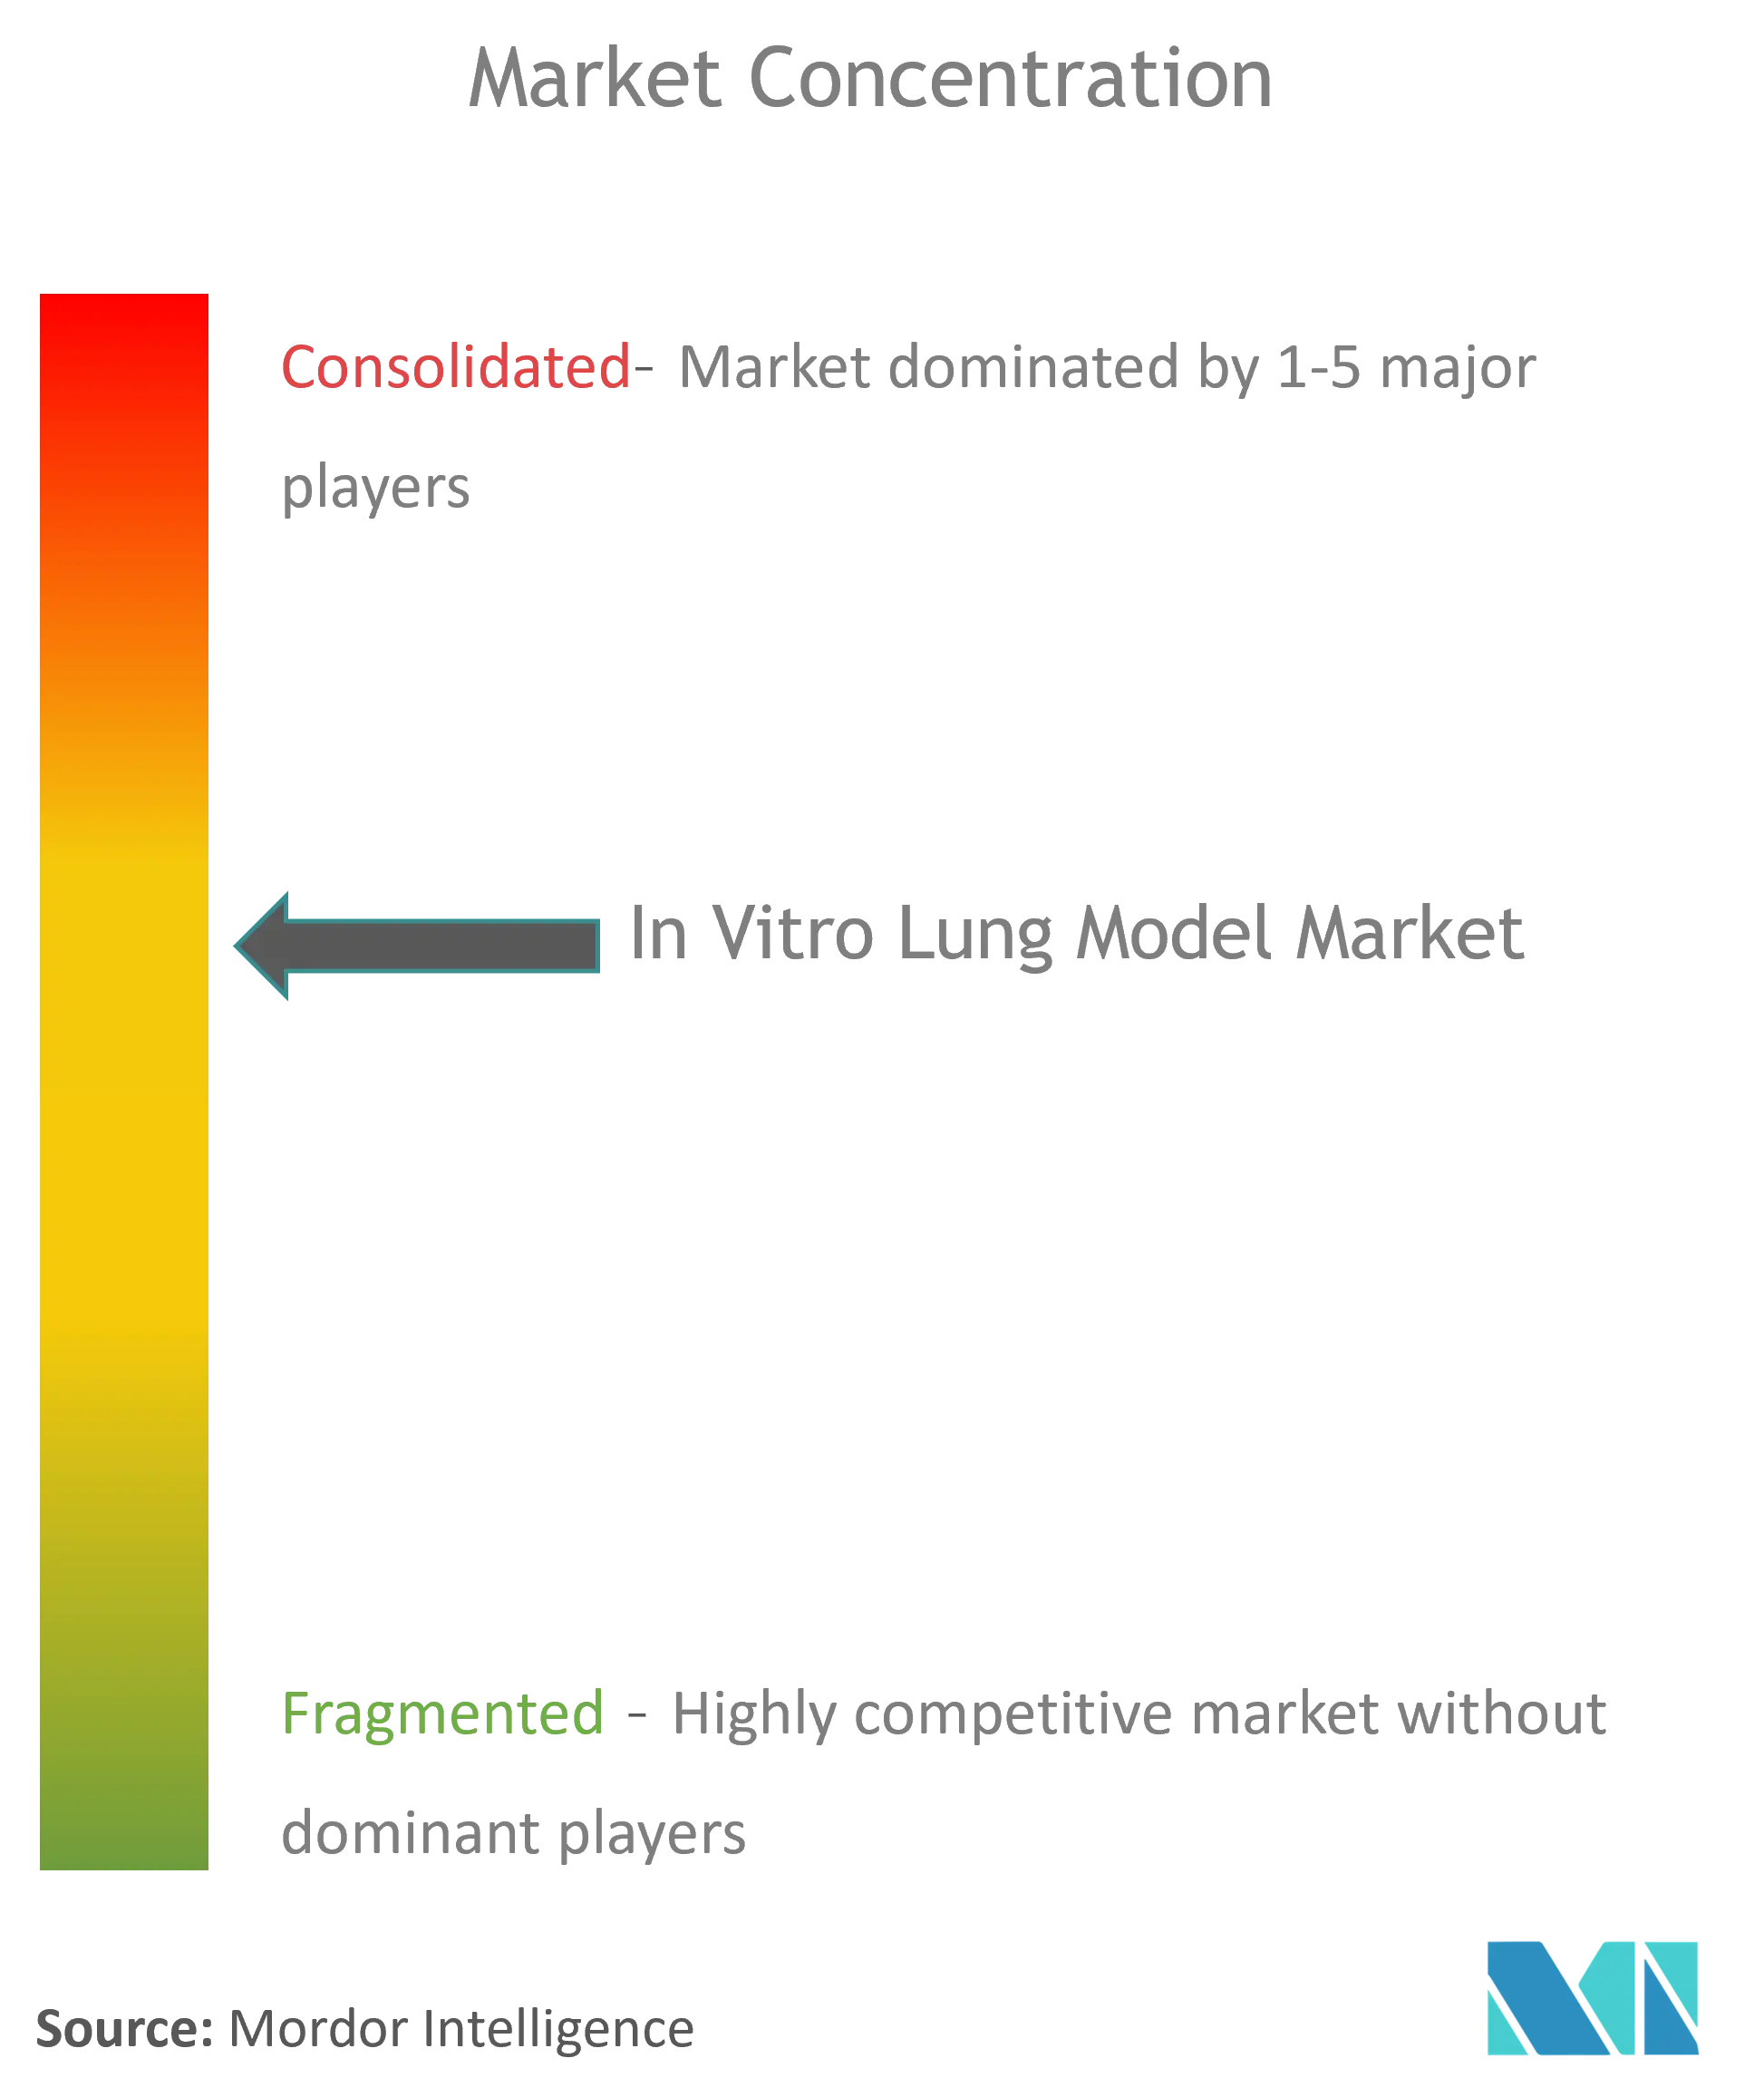 Global In Vitro Lung Model Market Concentration